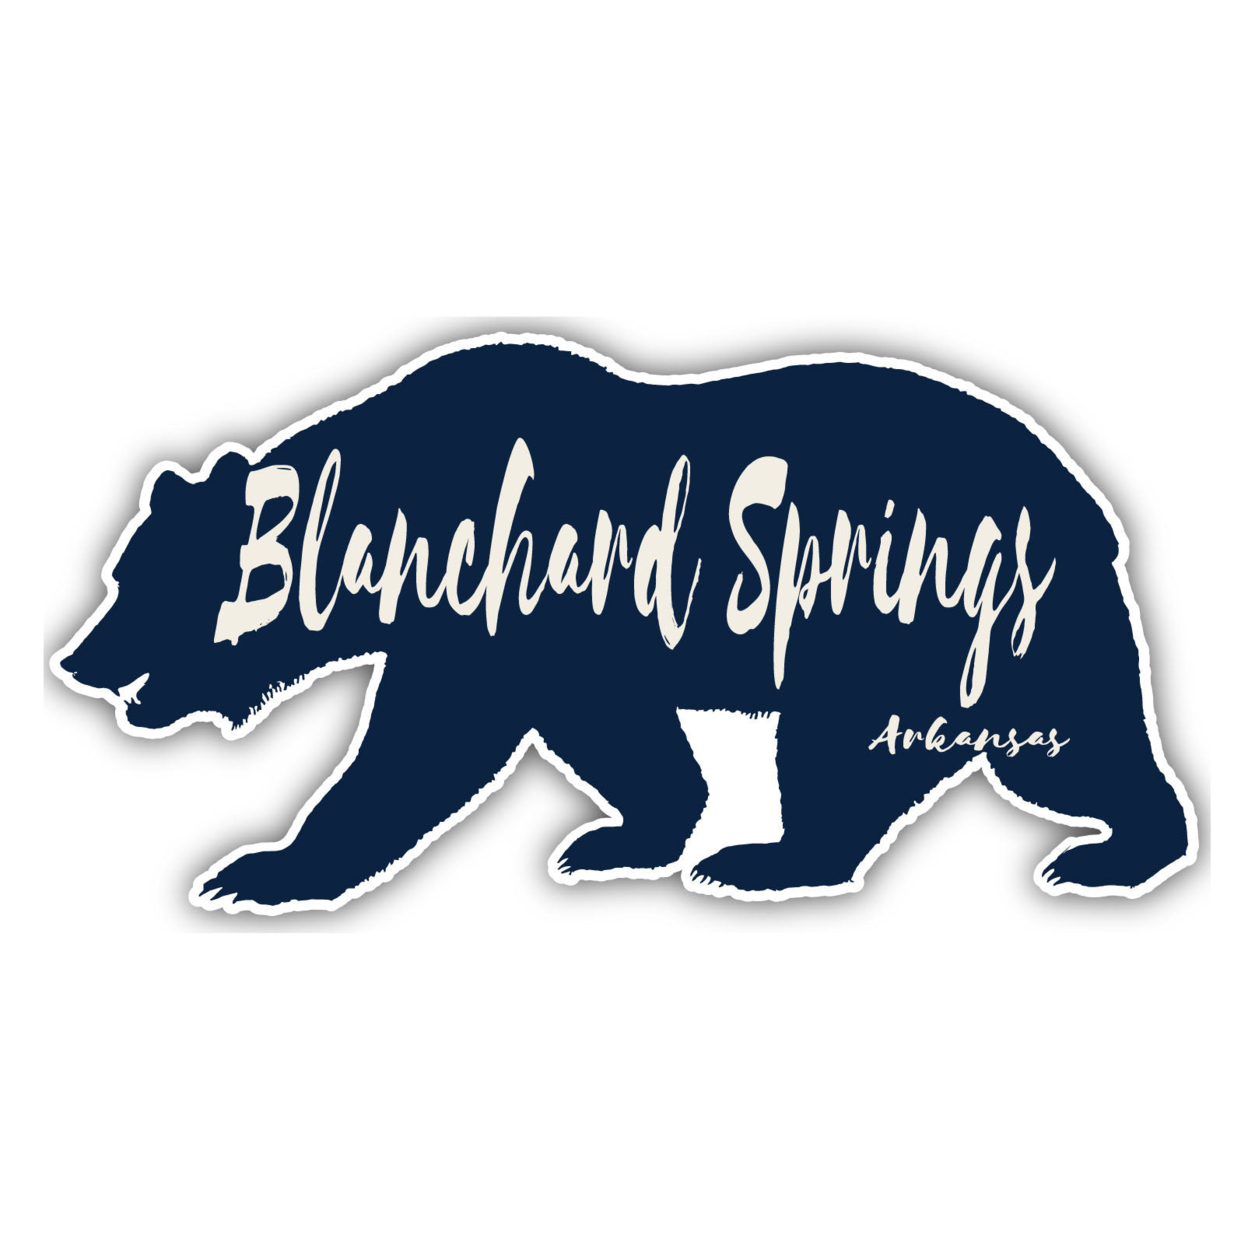 Blanchard Springs Arkansas Souvenir Decorative Stickers (Choose Theme And Size) - 4-Pack, 6-Inch, Bear